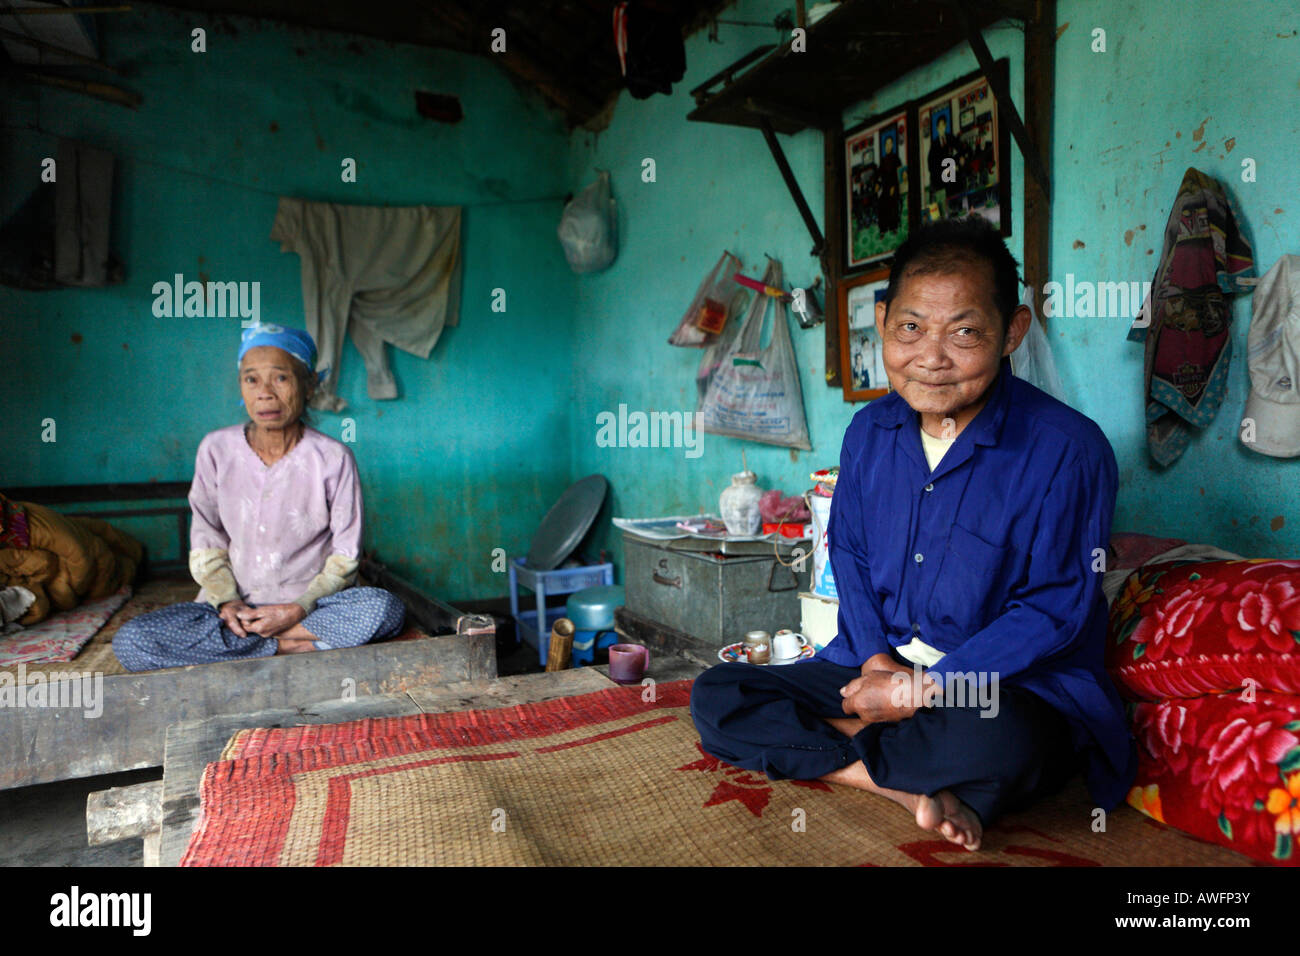 Quack Thi Thih, 71, and her husband, Quack Van Thui, 81, in their home almost completly destroyed by a flood, Lien Hoa, Hoa Bin Stock Photo